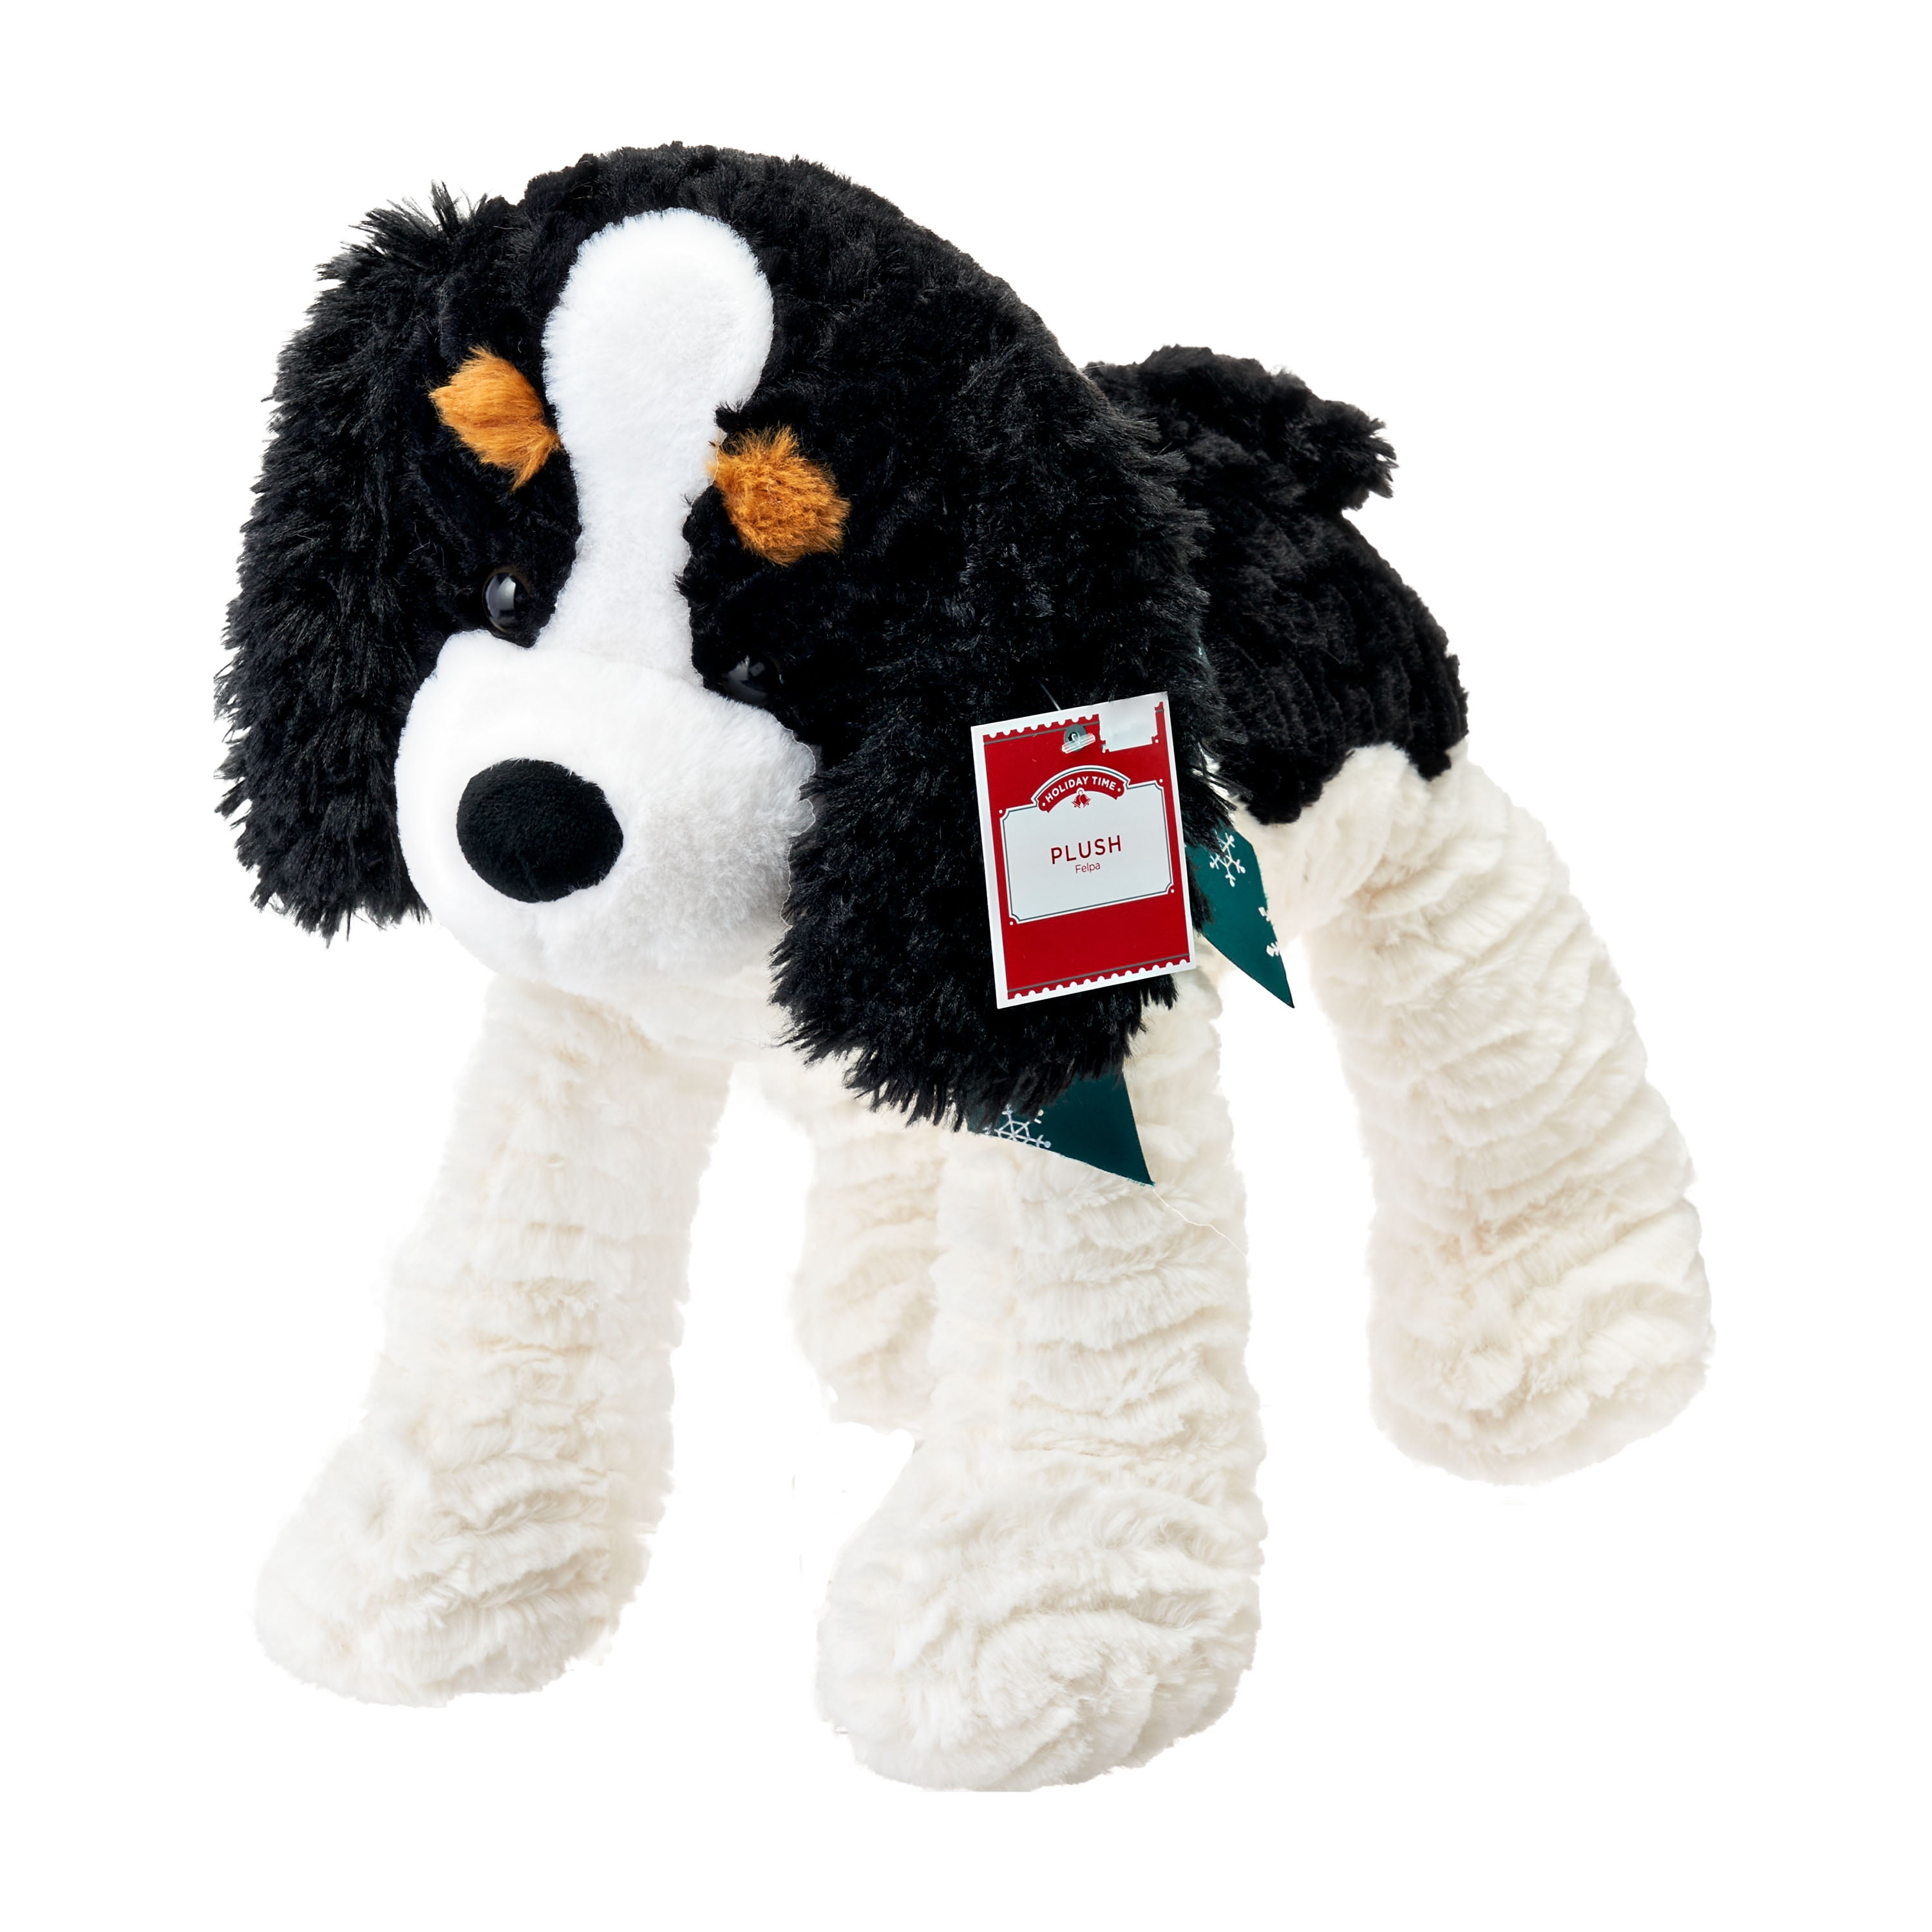 Realistic Plush Dog 12'' Collectible Soft Toy BERNESE MOUNTAIN DOG 